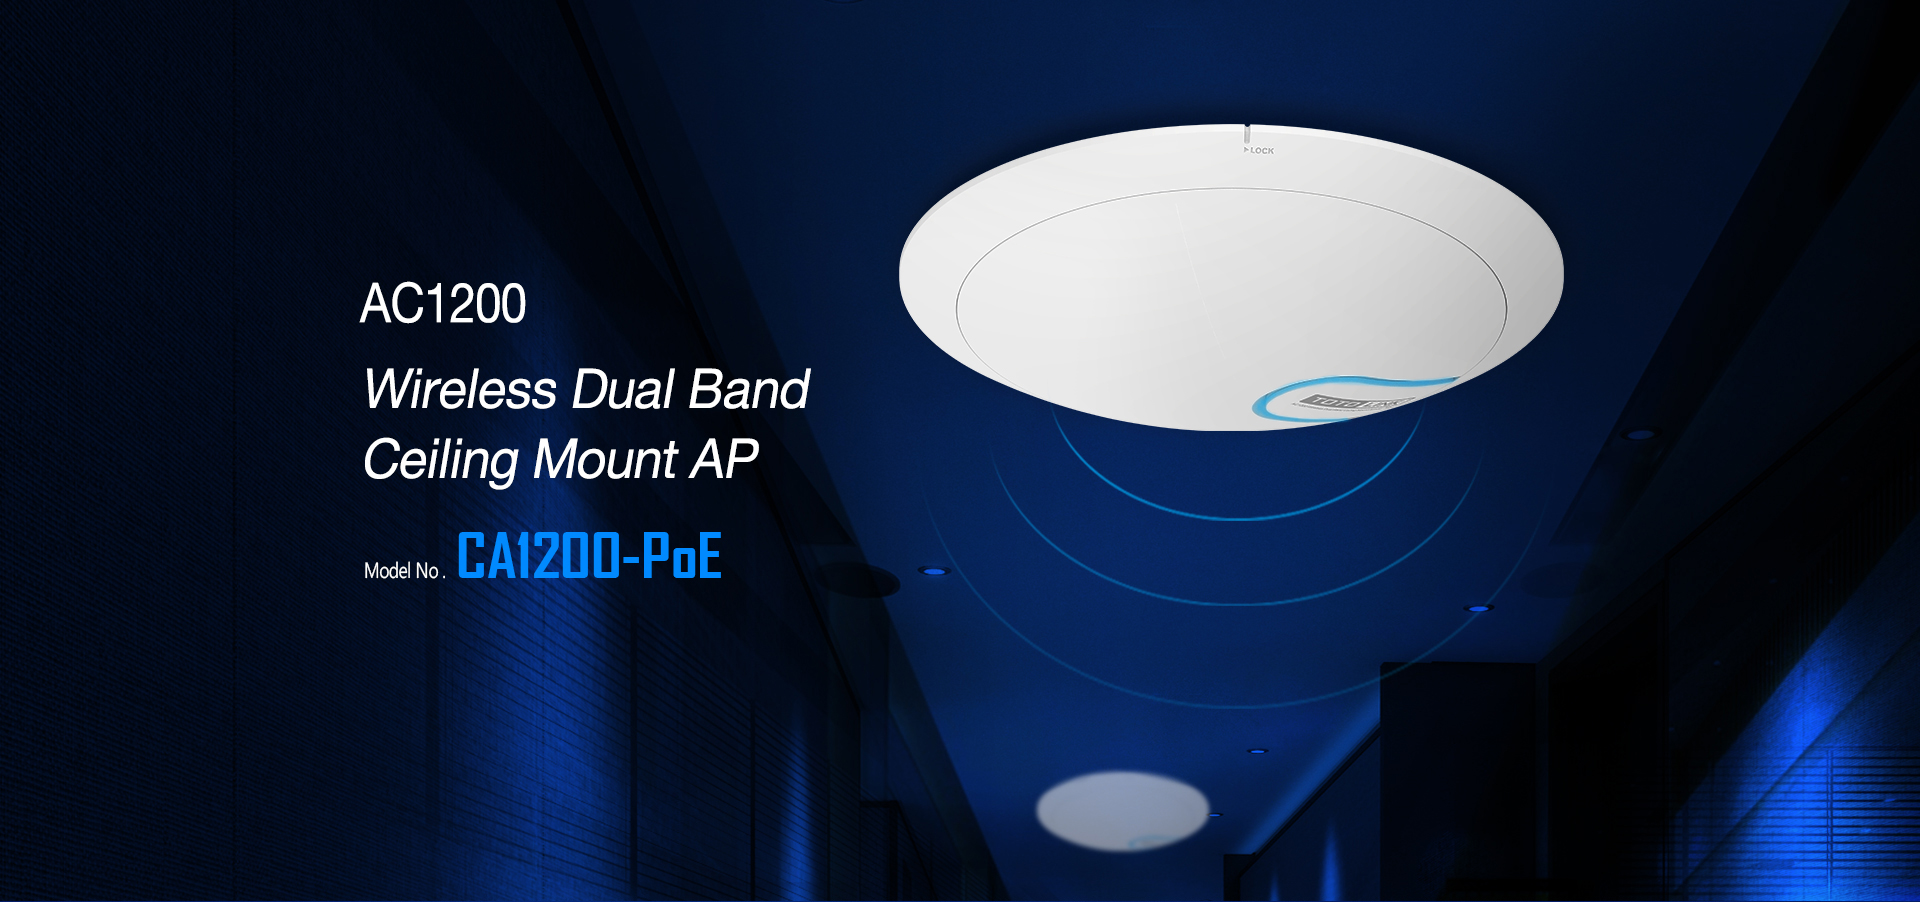 CA1200-PoE-AC1200-Wireless-Dual-Band-Ceiling-Mount-Ap